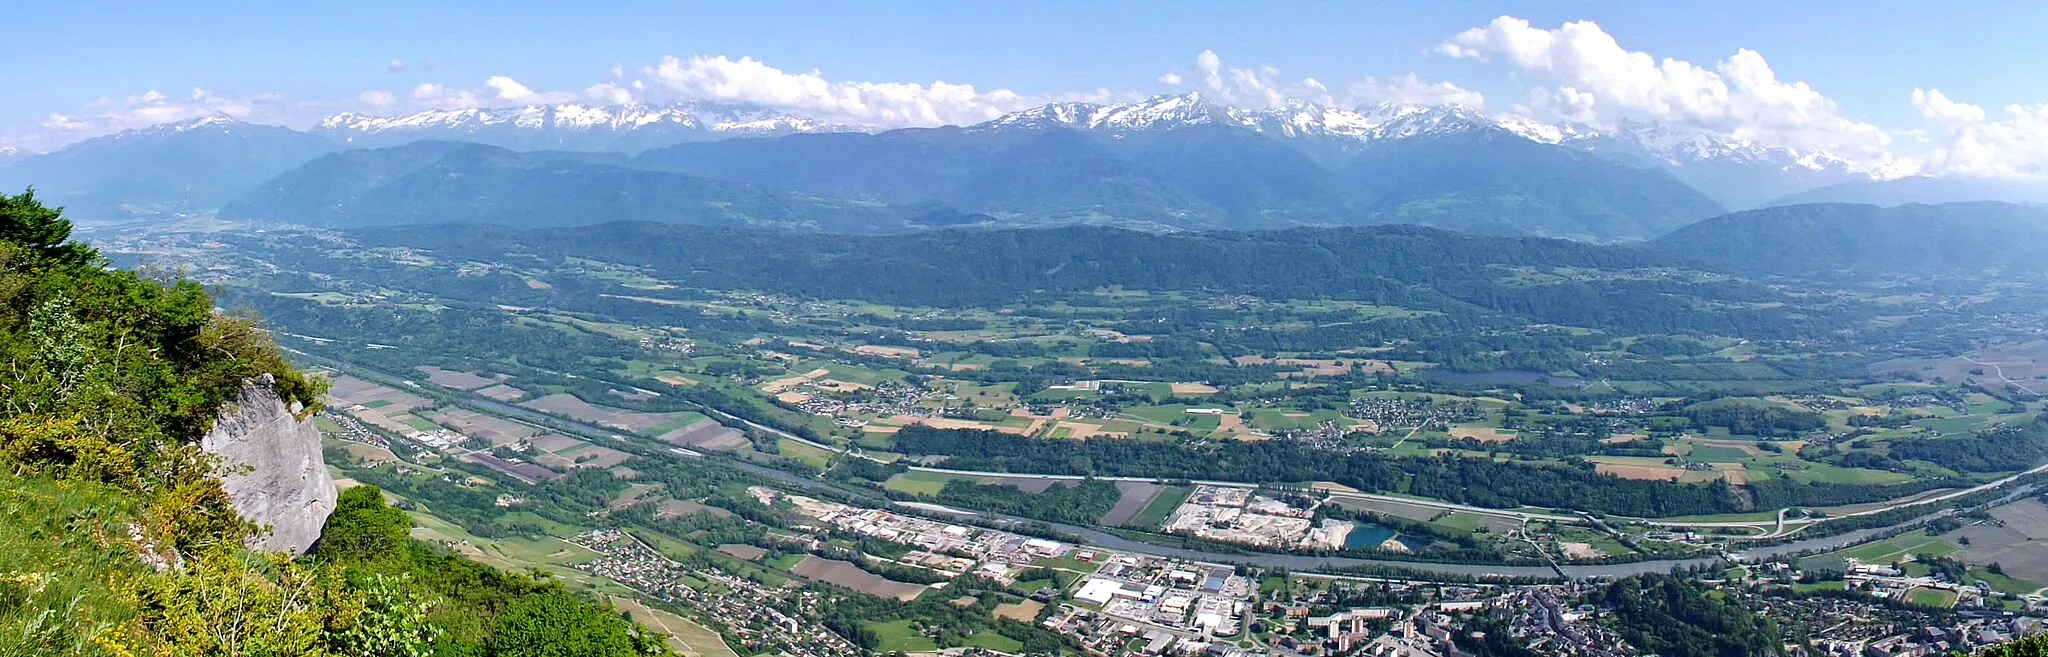 Photo showing: Panoramic sight, from the roche du Guet in the Bauges mountain range, of the Combe de Savoie broad valley with the Belledonne mountain range at the background, in Savoie, France.